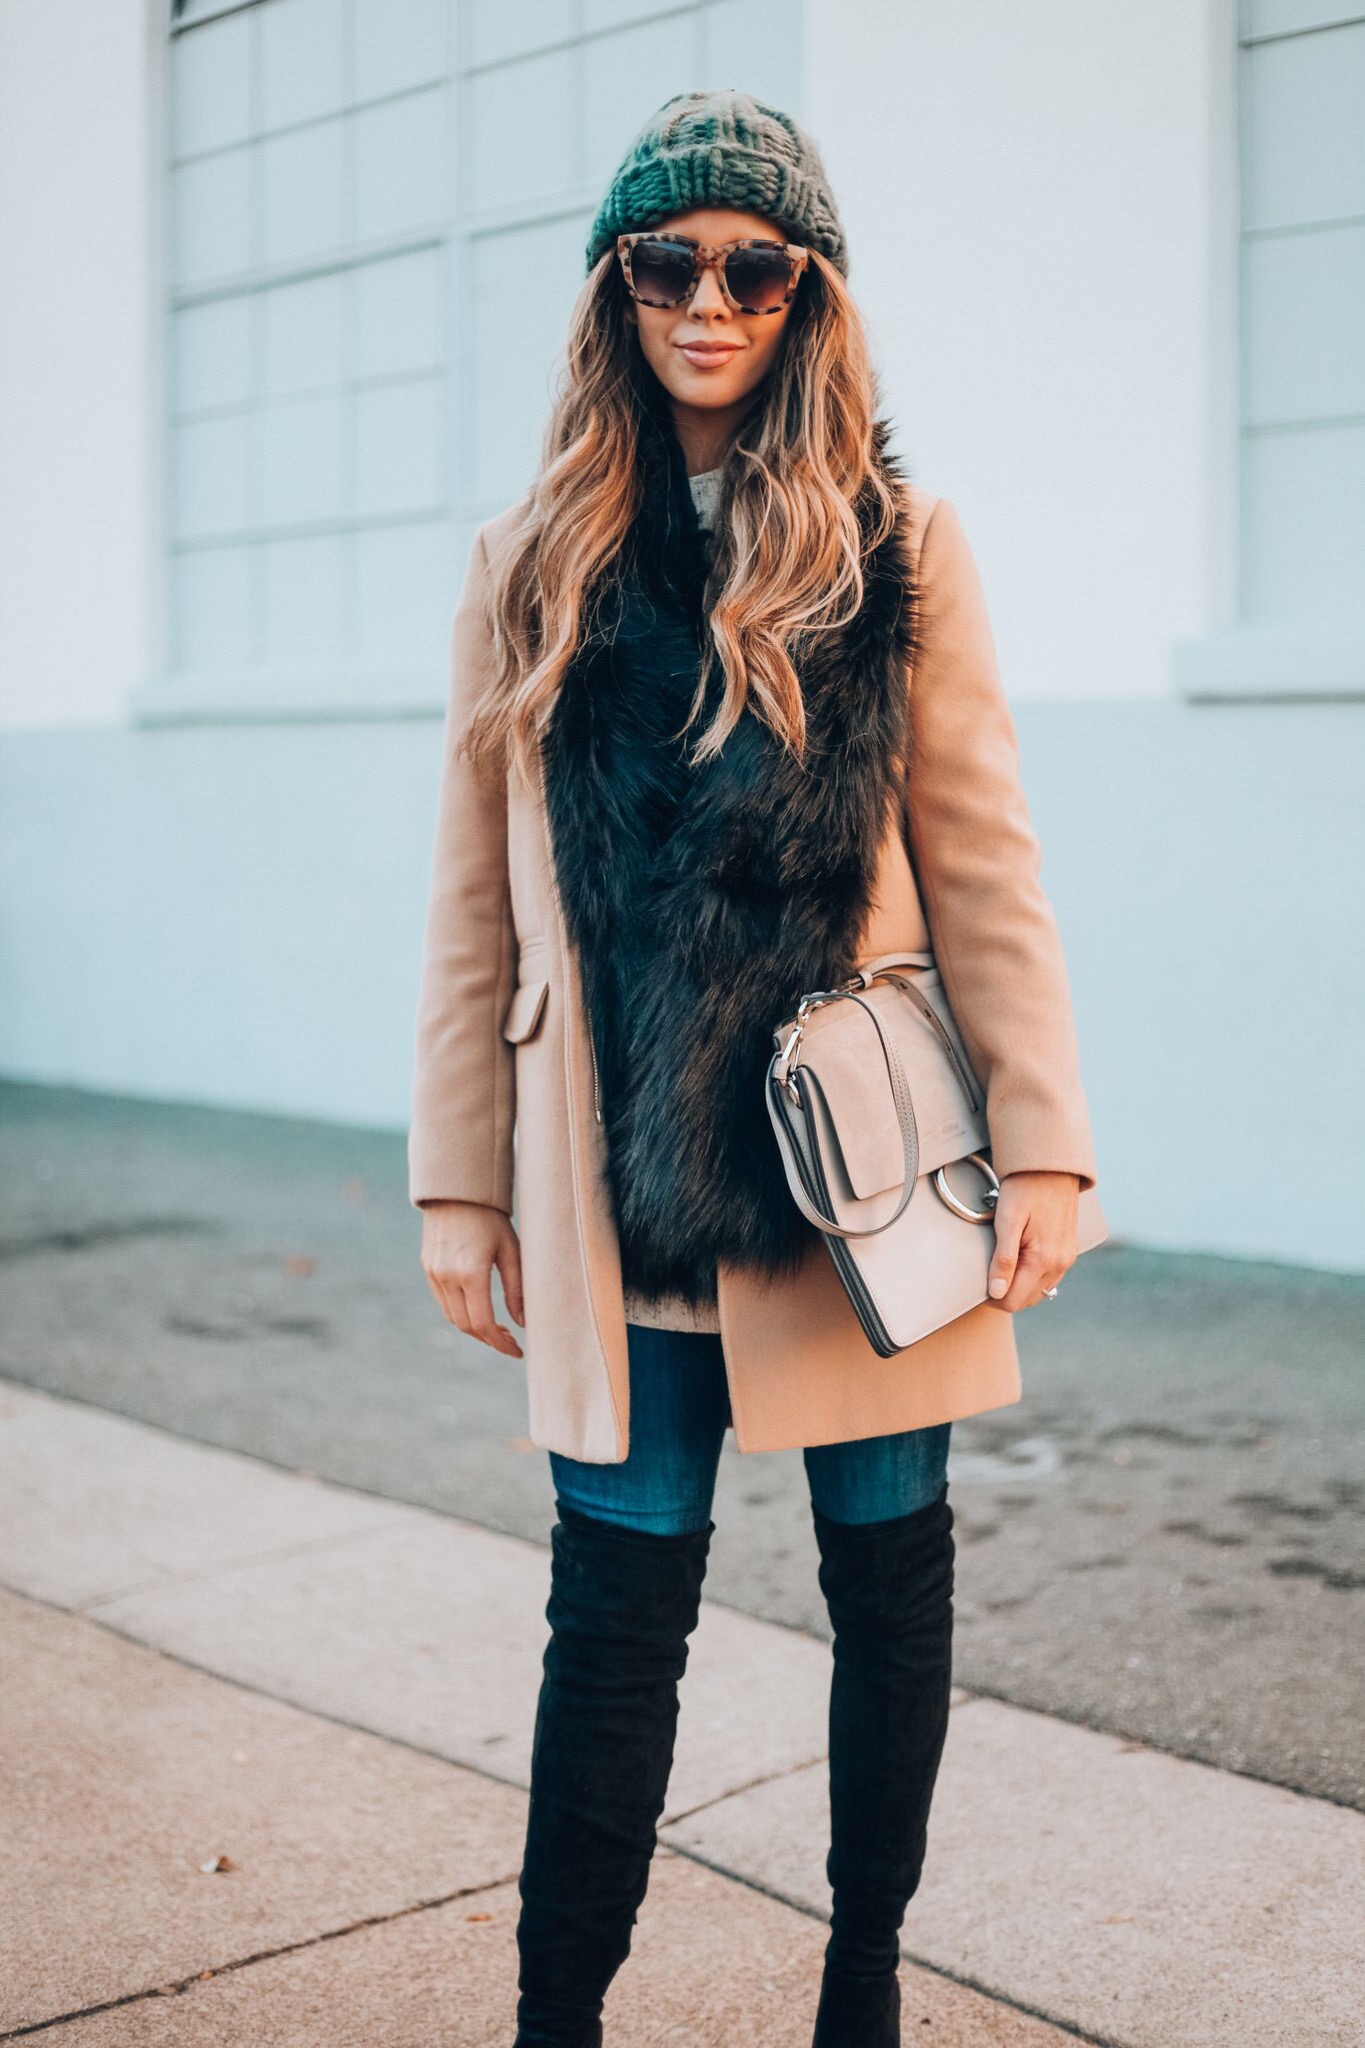 Winter Style: All Bundled Up by popular San Francisco fashion blogger The Girl in the Yellow Dress